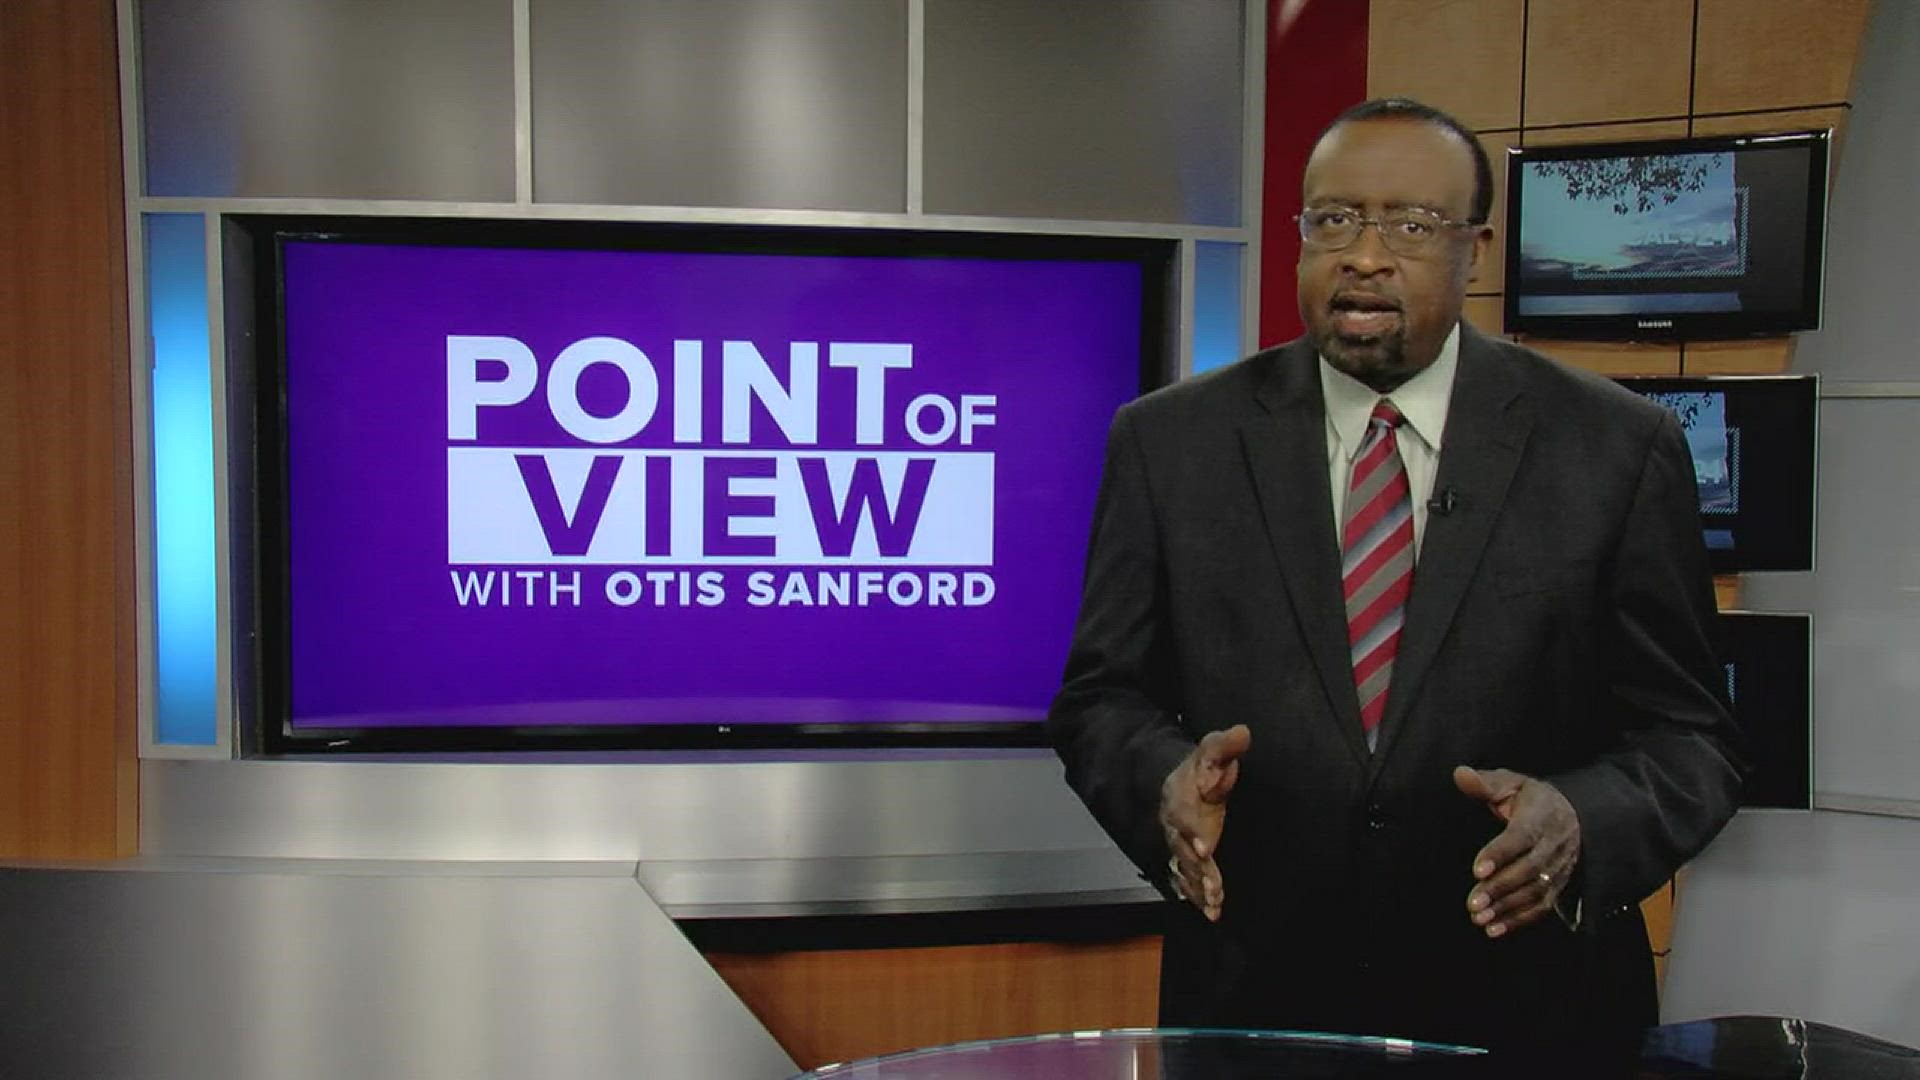 Political analyst and commentator Otis Sanford shared his point of view on the U.S. infrastructure bill.